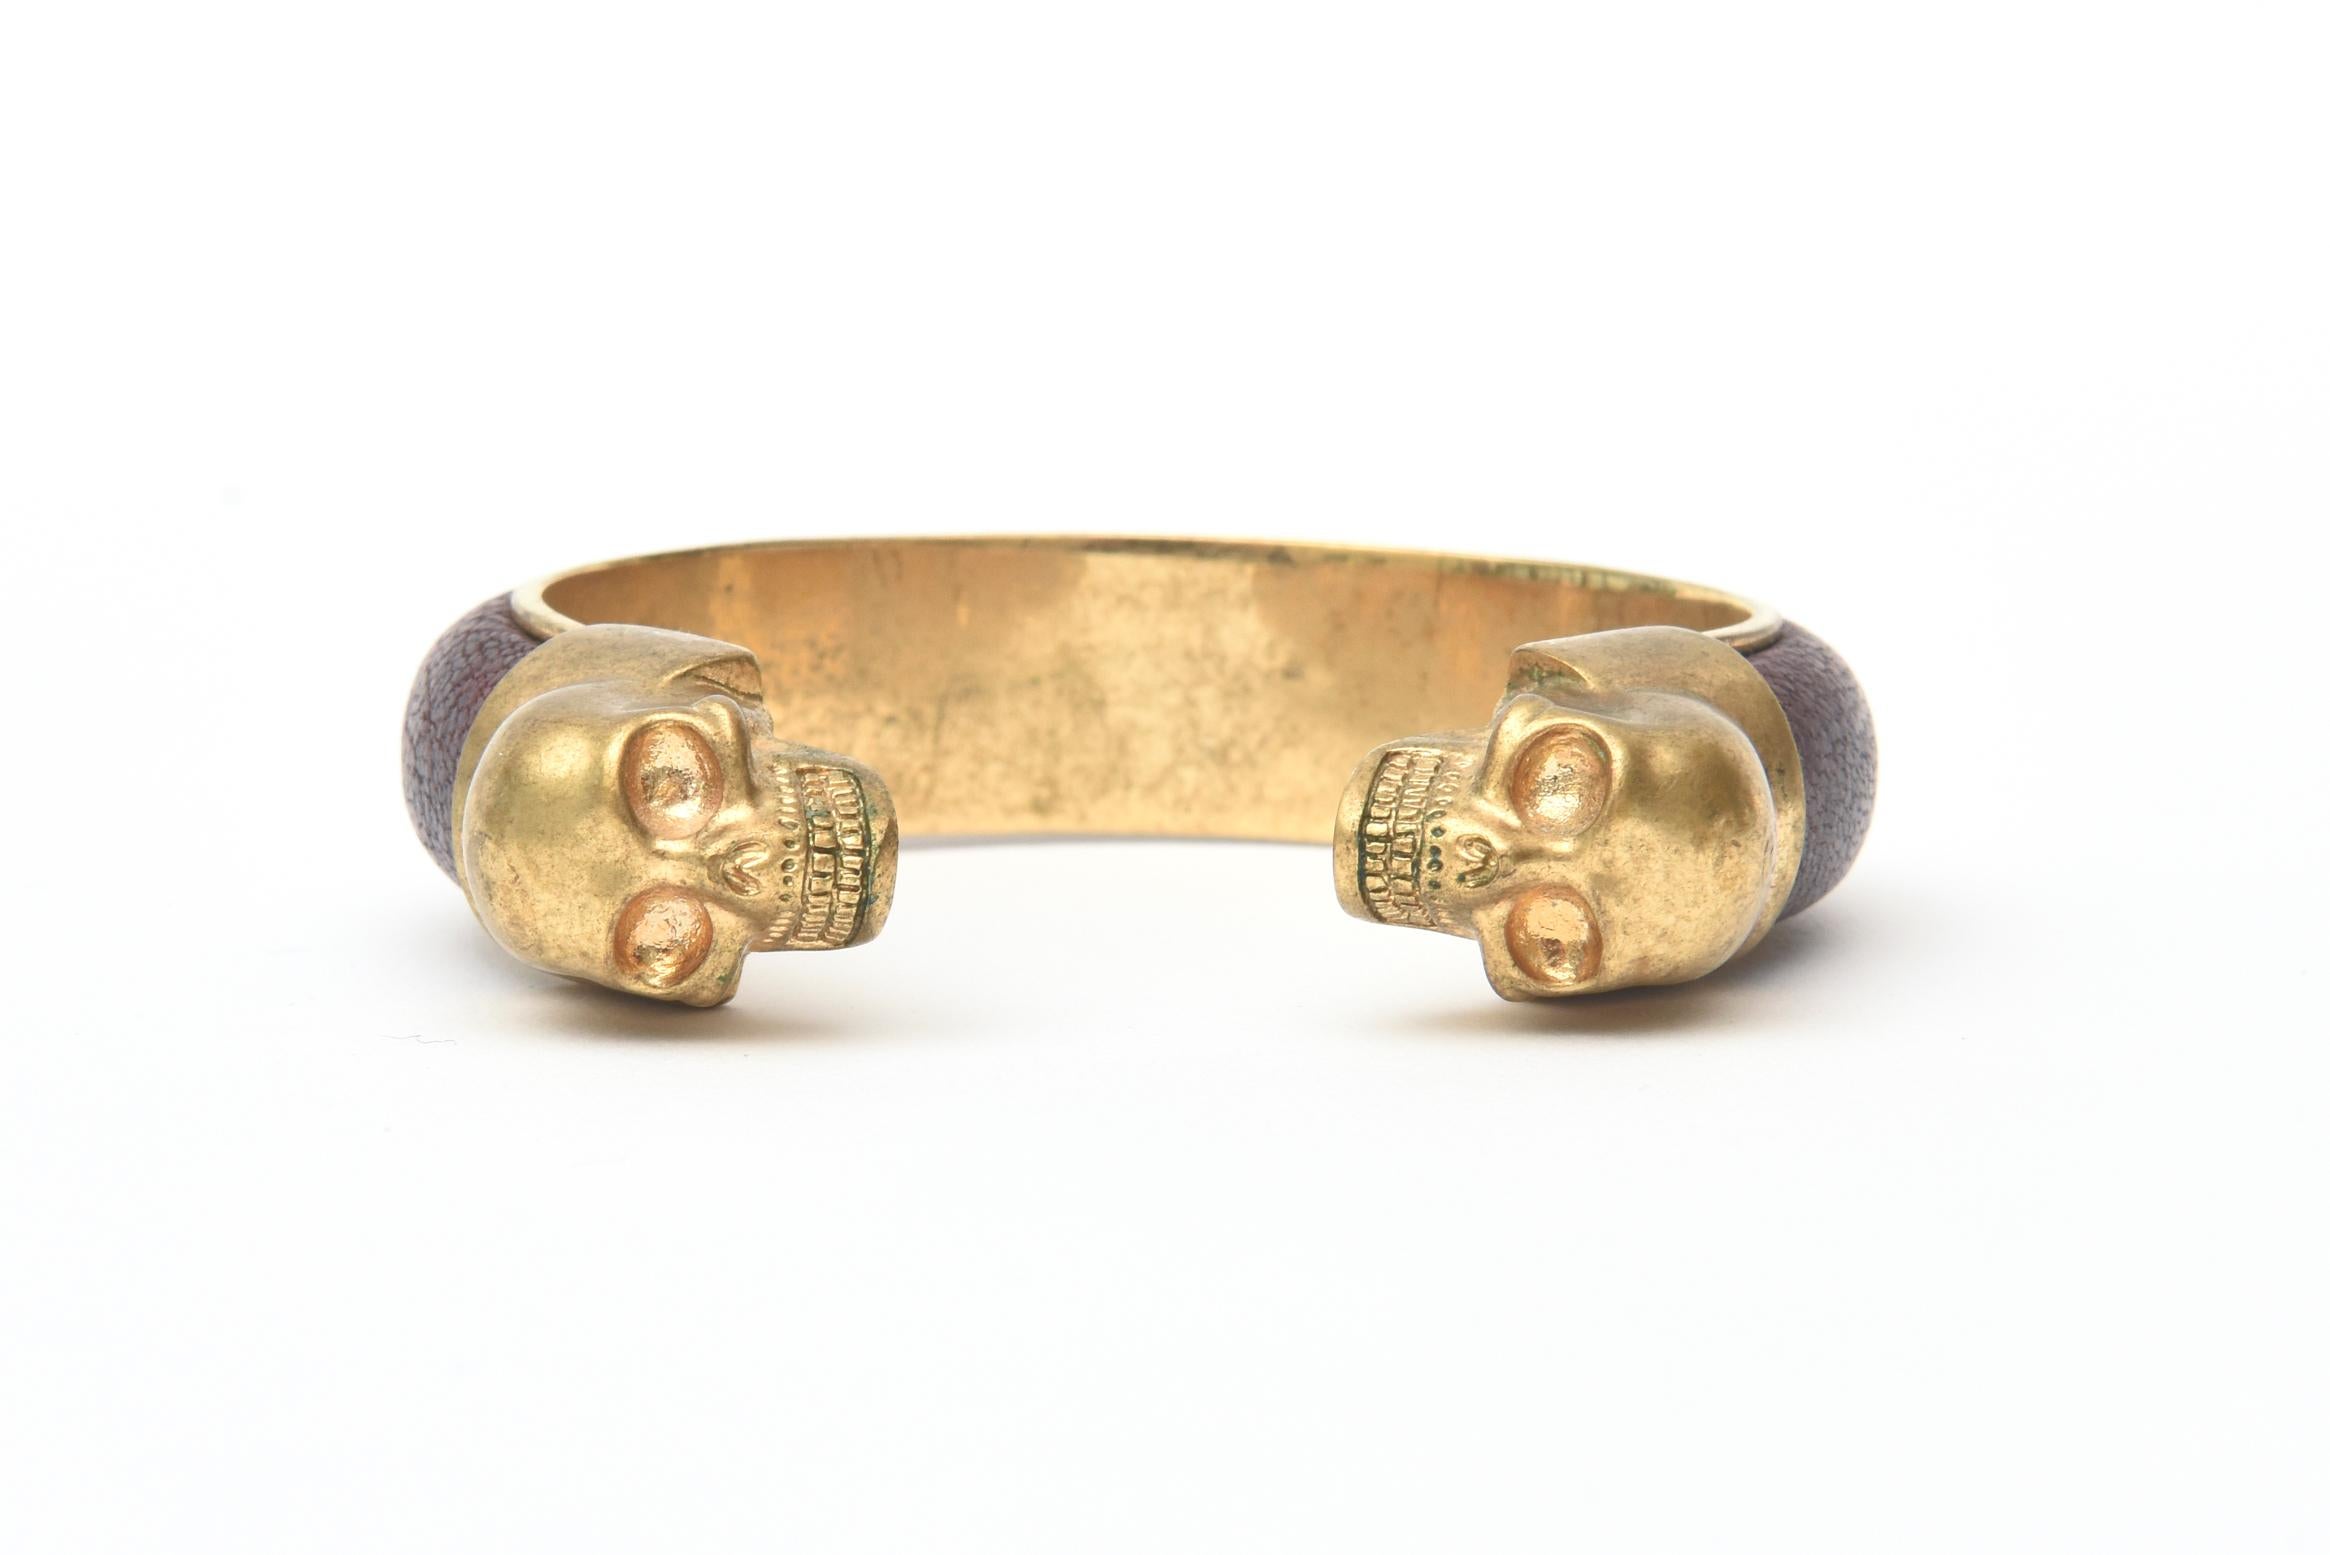 Alexander McQueen Gold Plated and Leather Skull Bracelet im Zustand „Gut“ in North Miami, FL